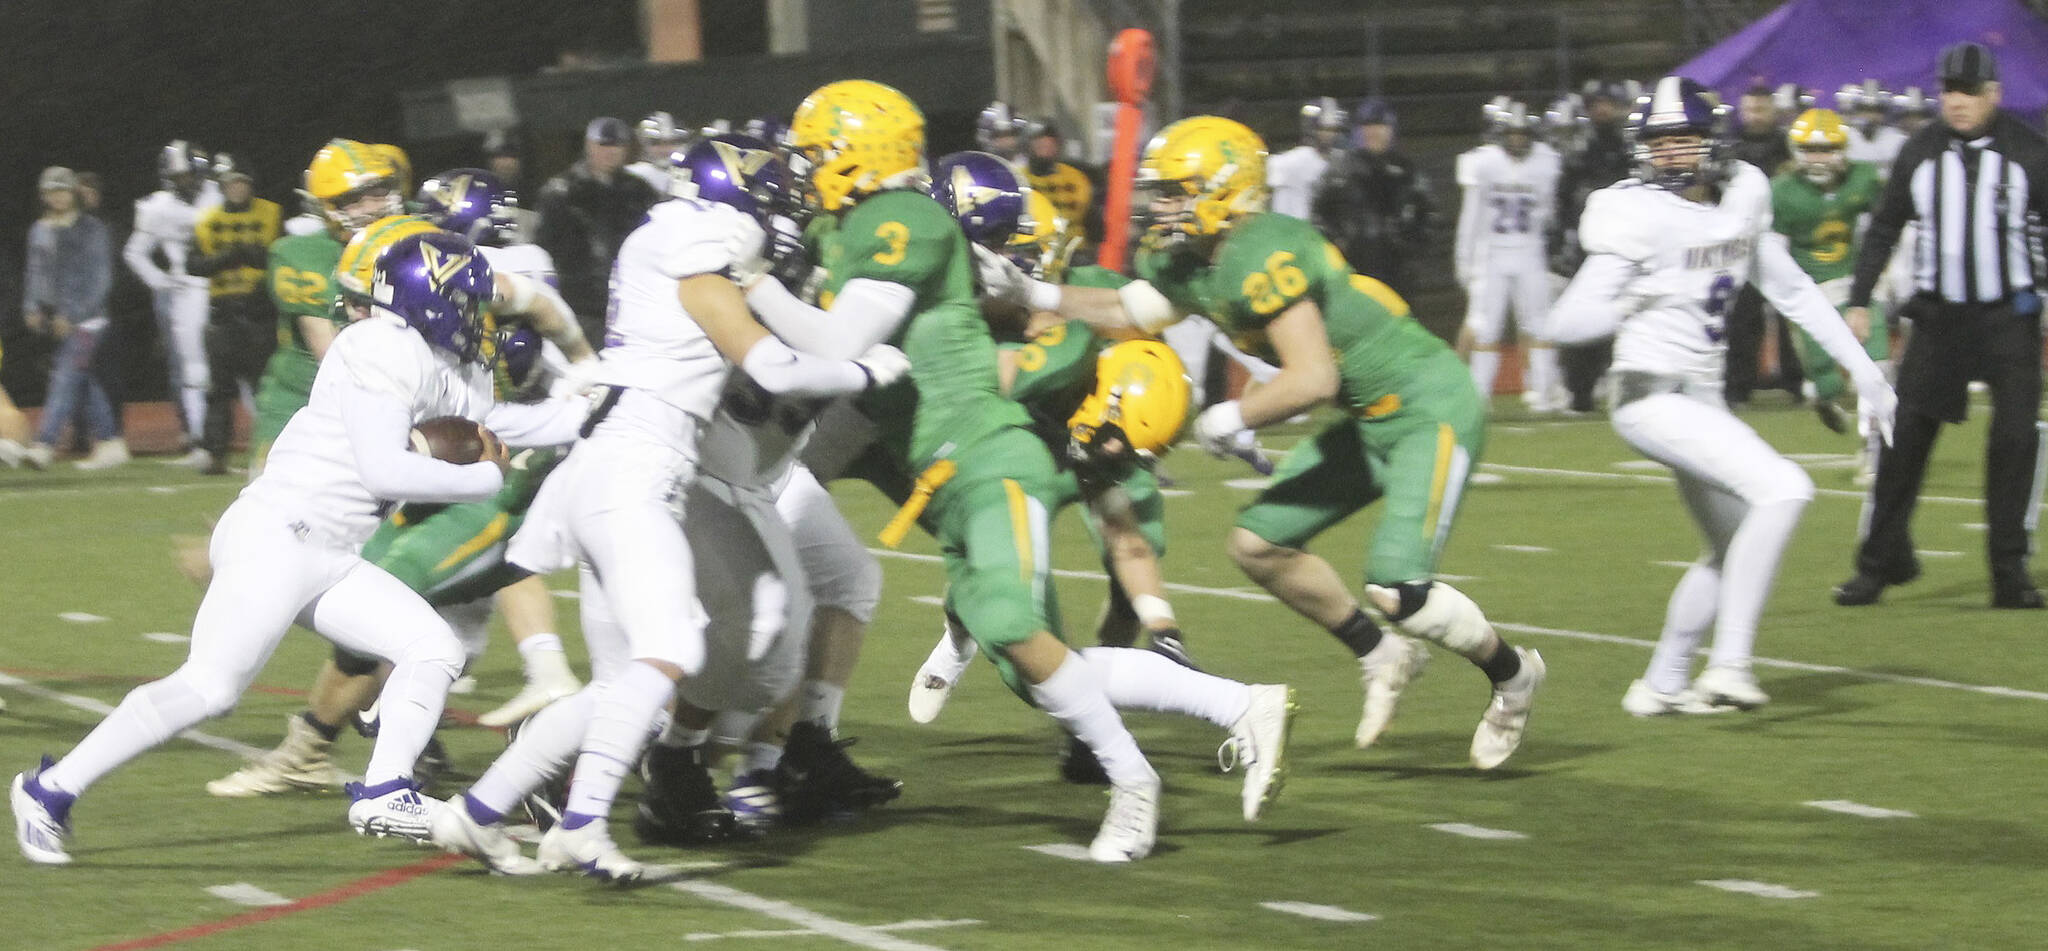 The Viking rushing attack was effective most of the game.